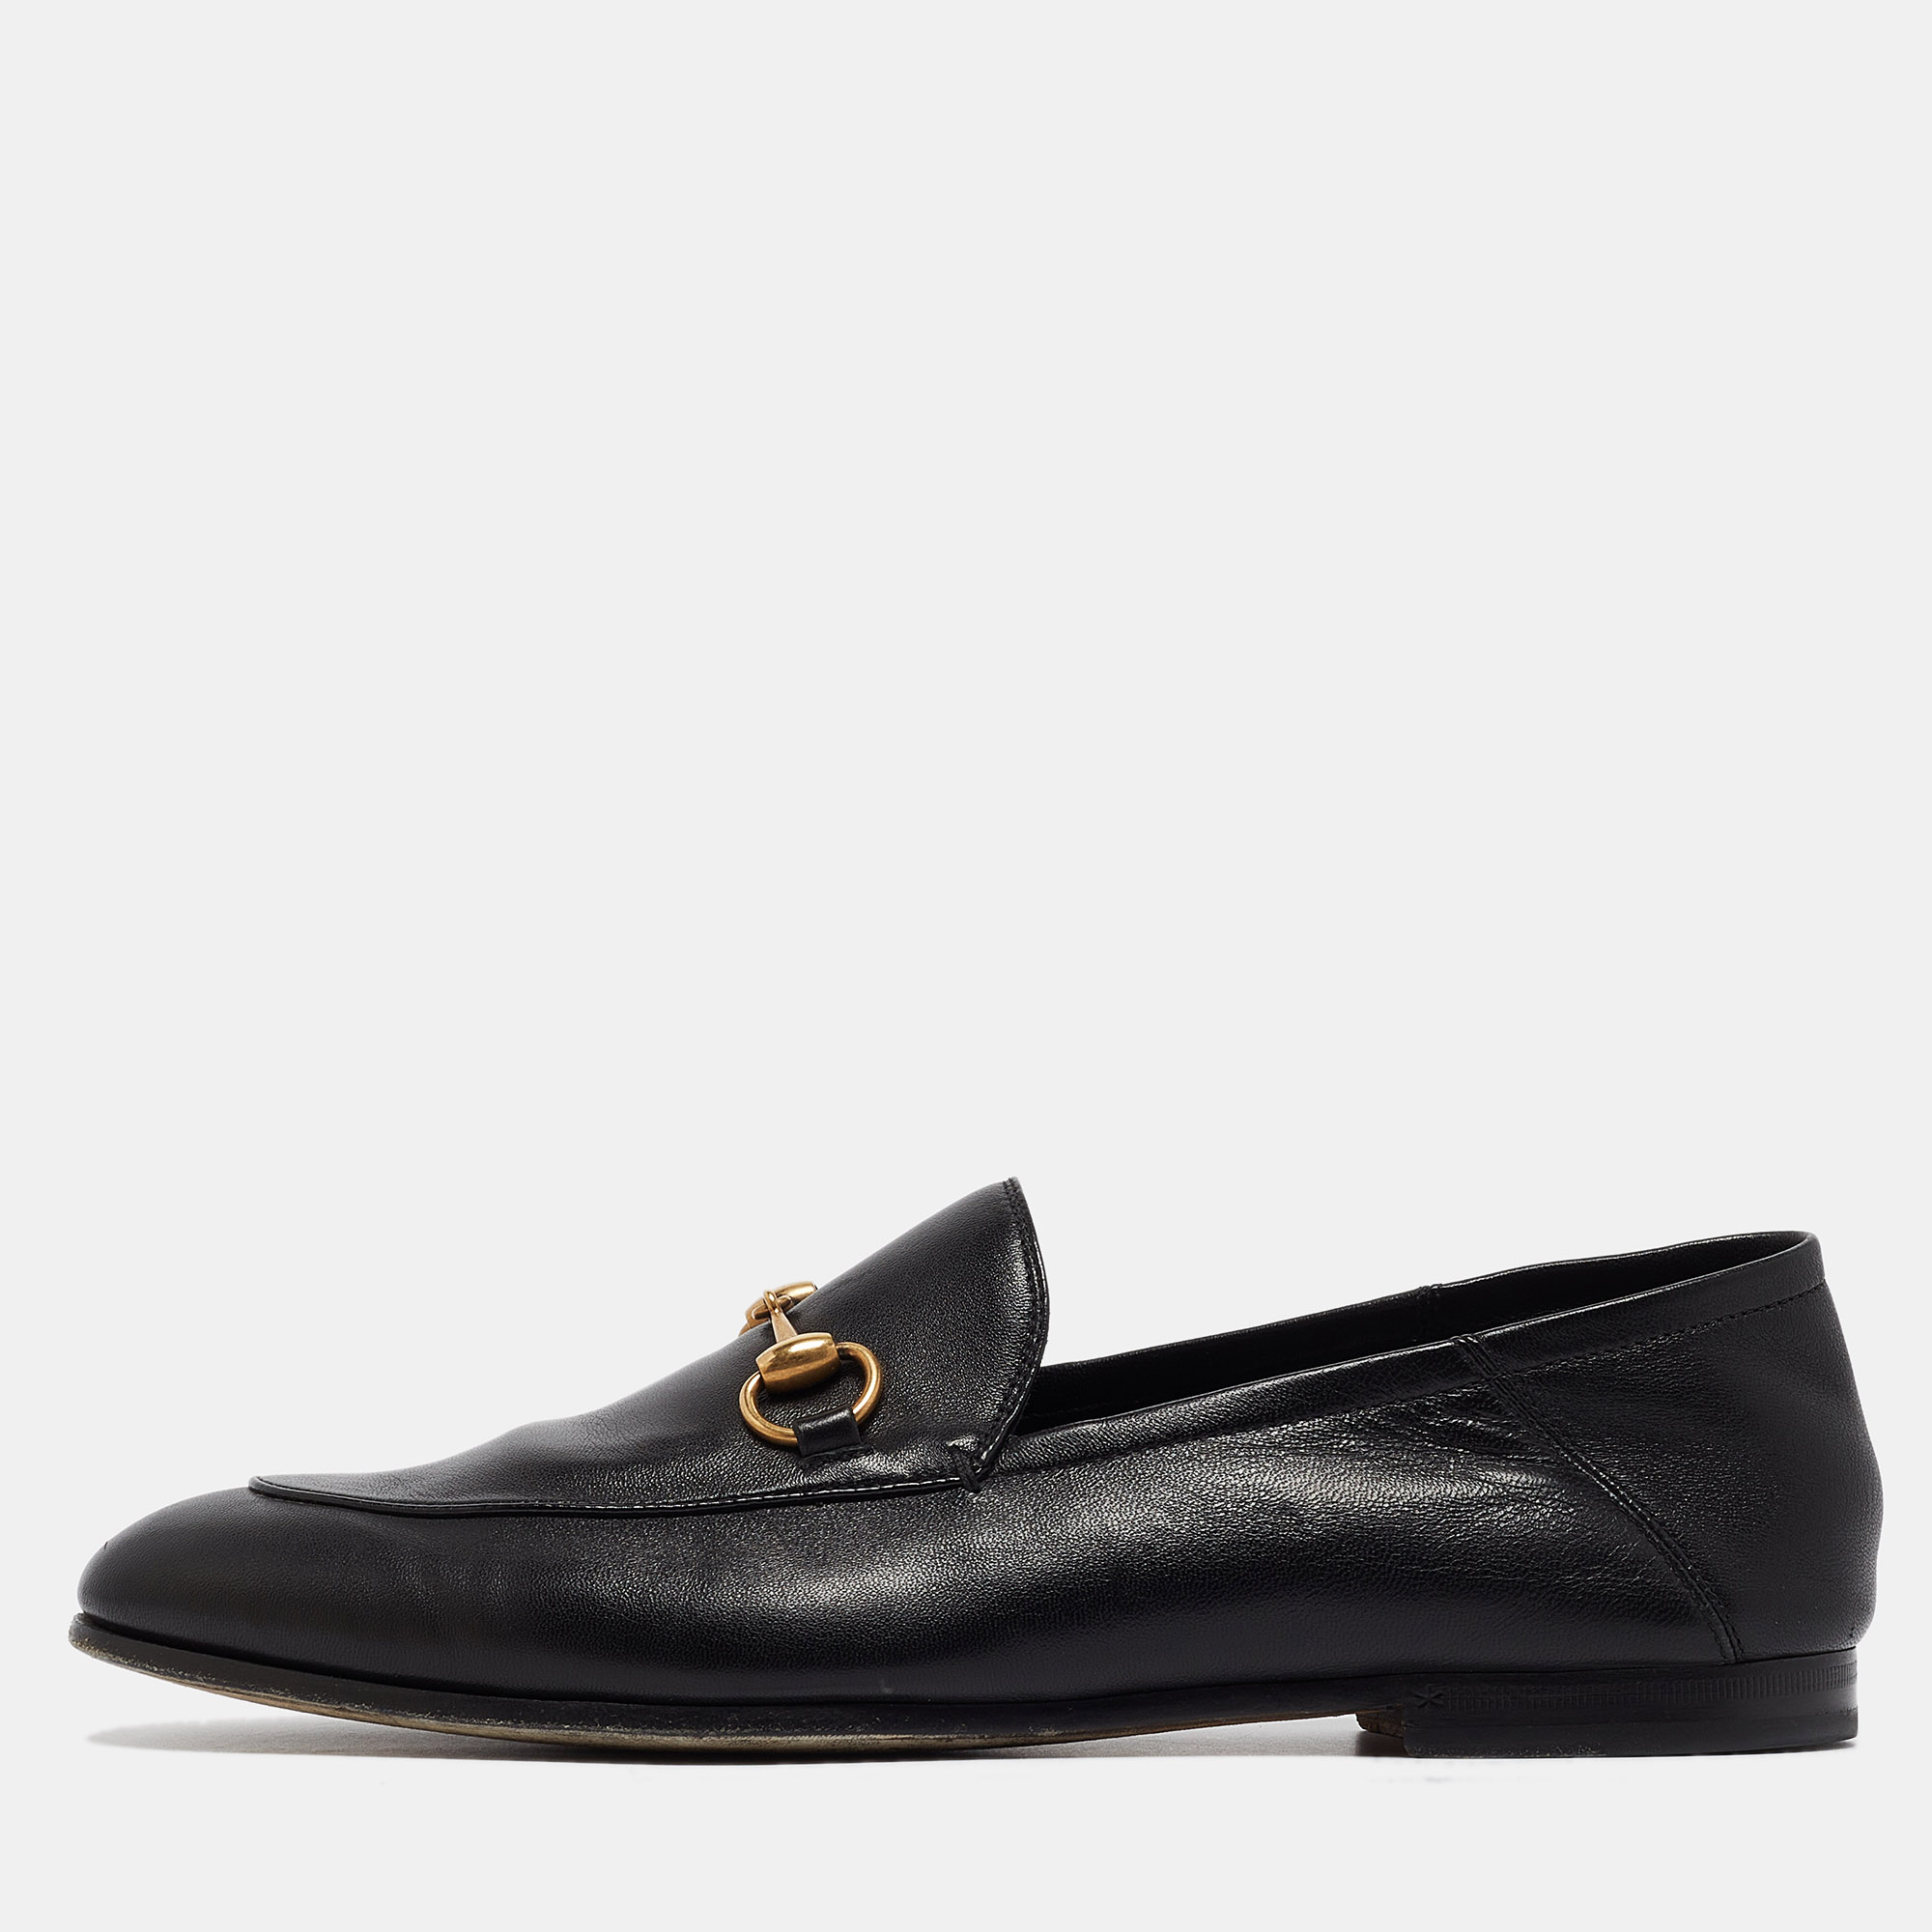 Pre-owned Gucci Jordaan Black Leather Horsebit Loafers Size 42.5